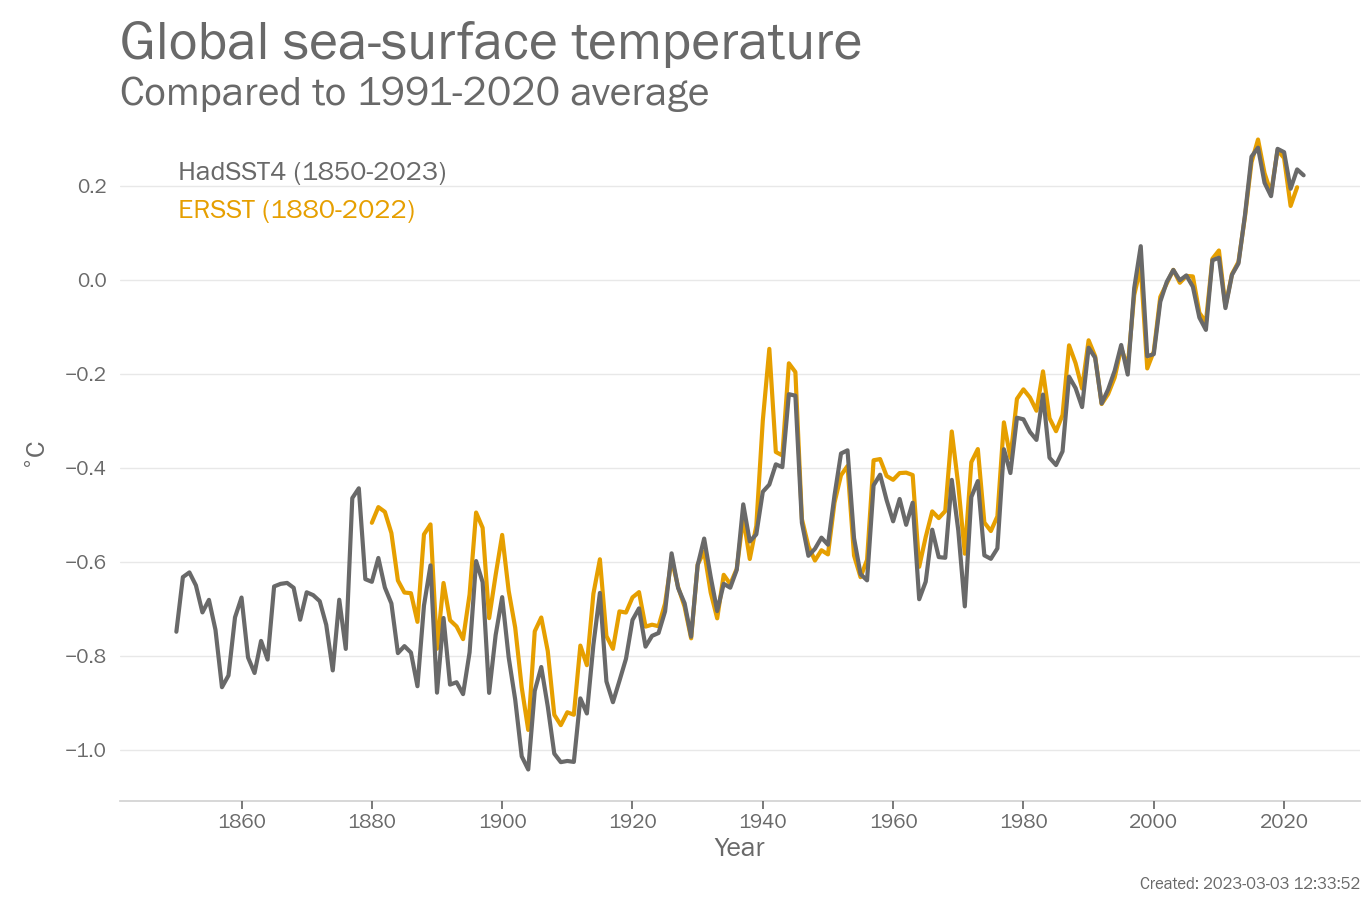 Annual Global mean sea-surface temperature (°C, difference from the 1991-2020 average)  from 1850-2023. Data are from the following two data sets: ERSST, HadSST4.